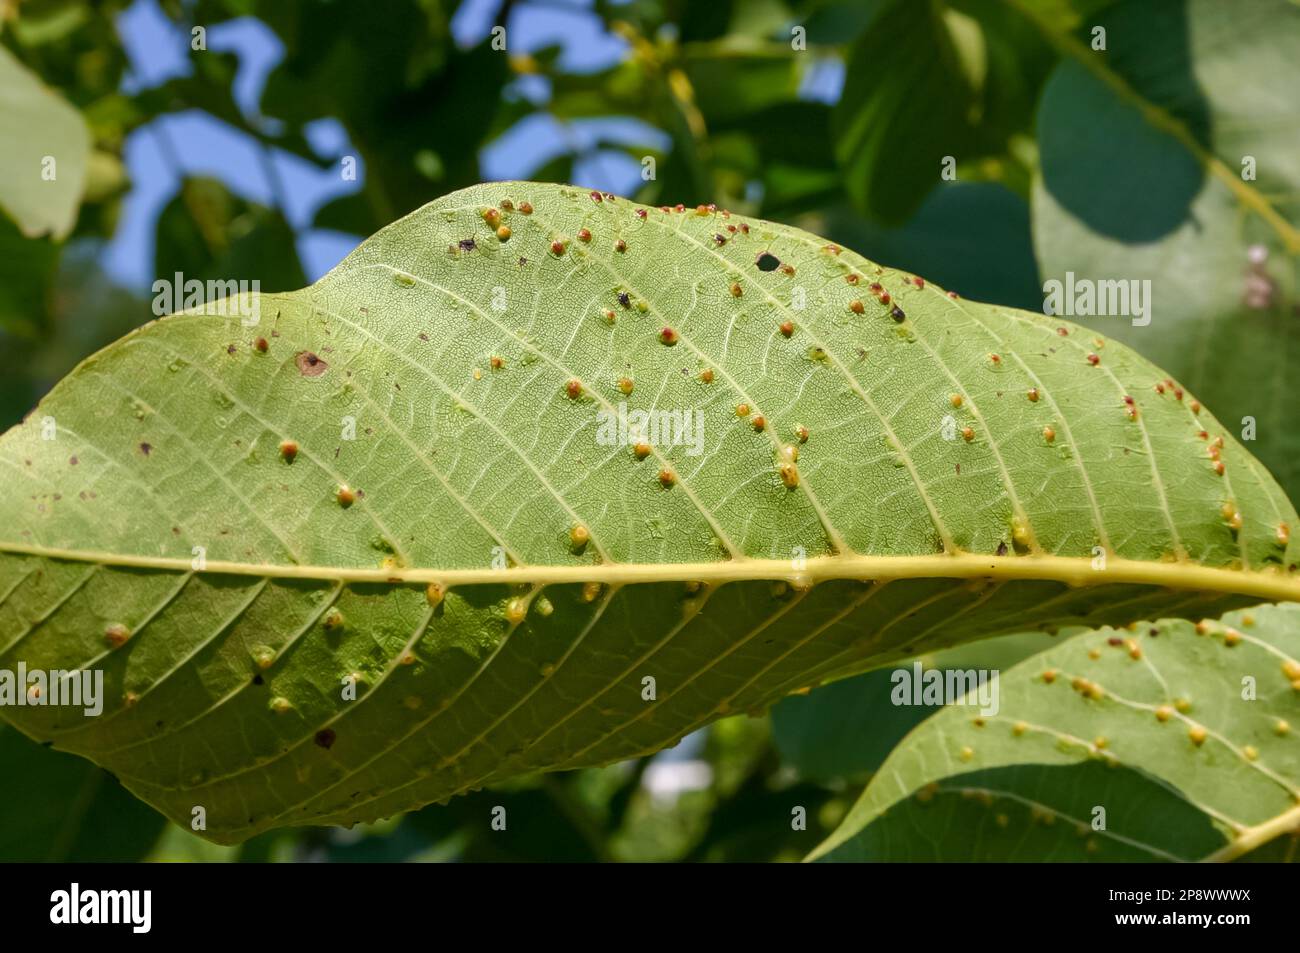 Galls with parasites on a green walnut leaf in the garden Stock Photo